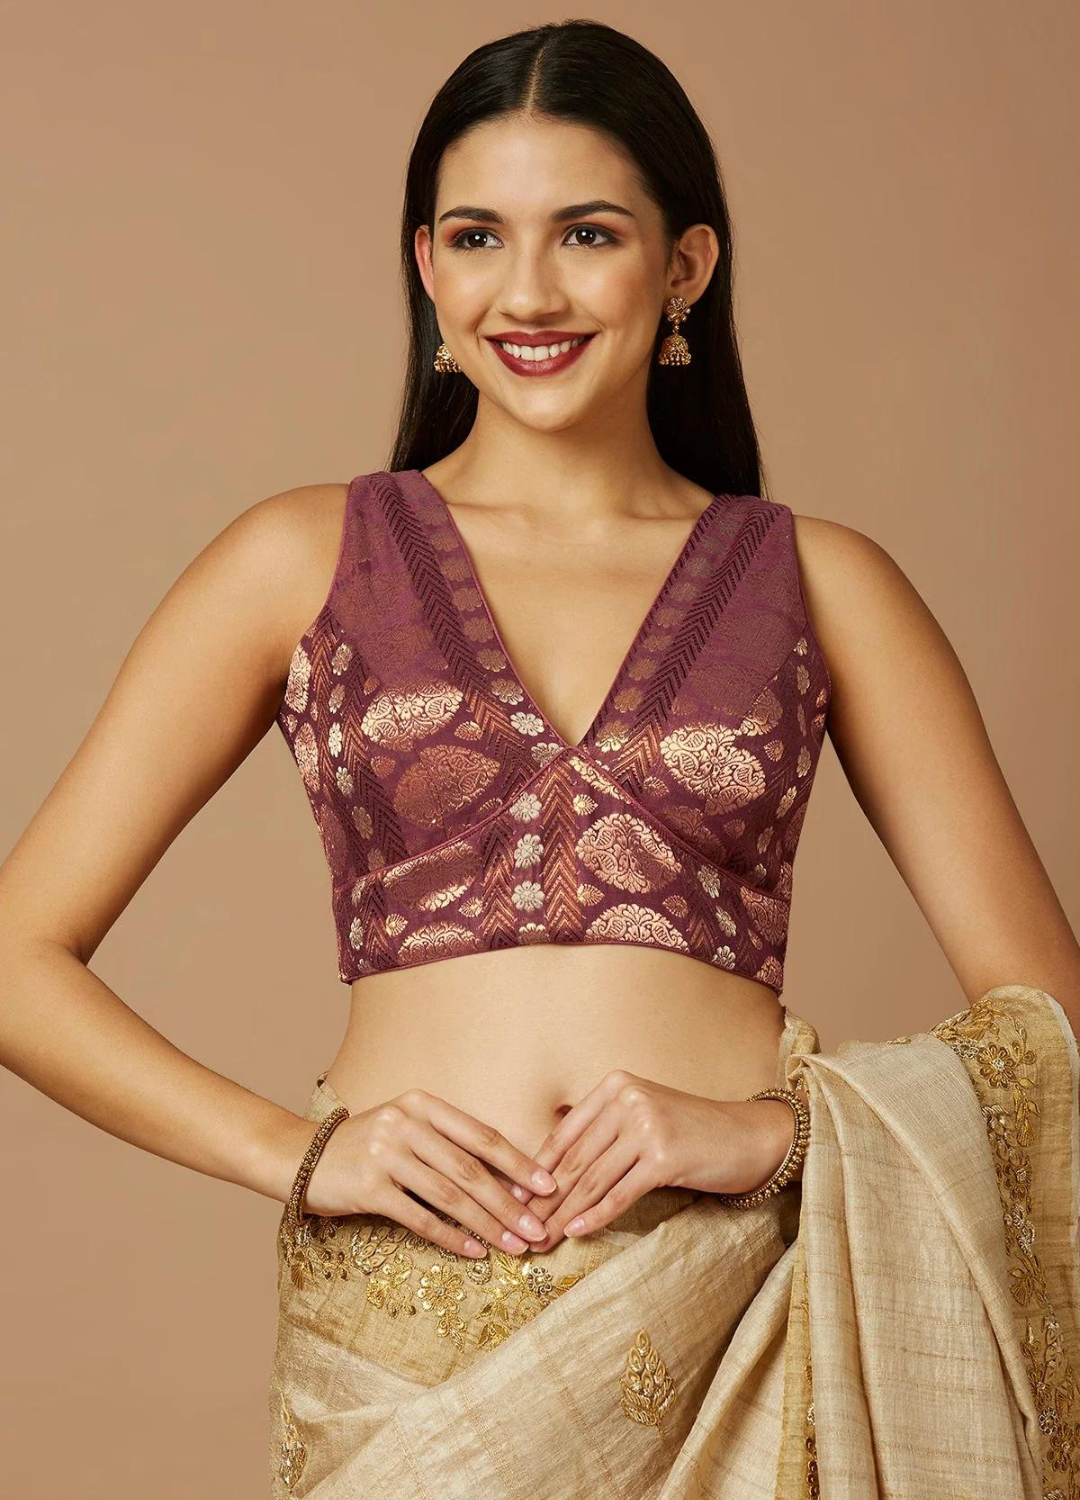 Readymade Brocade Blouses - A must-have this wedding season!